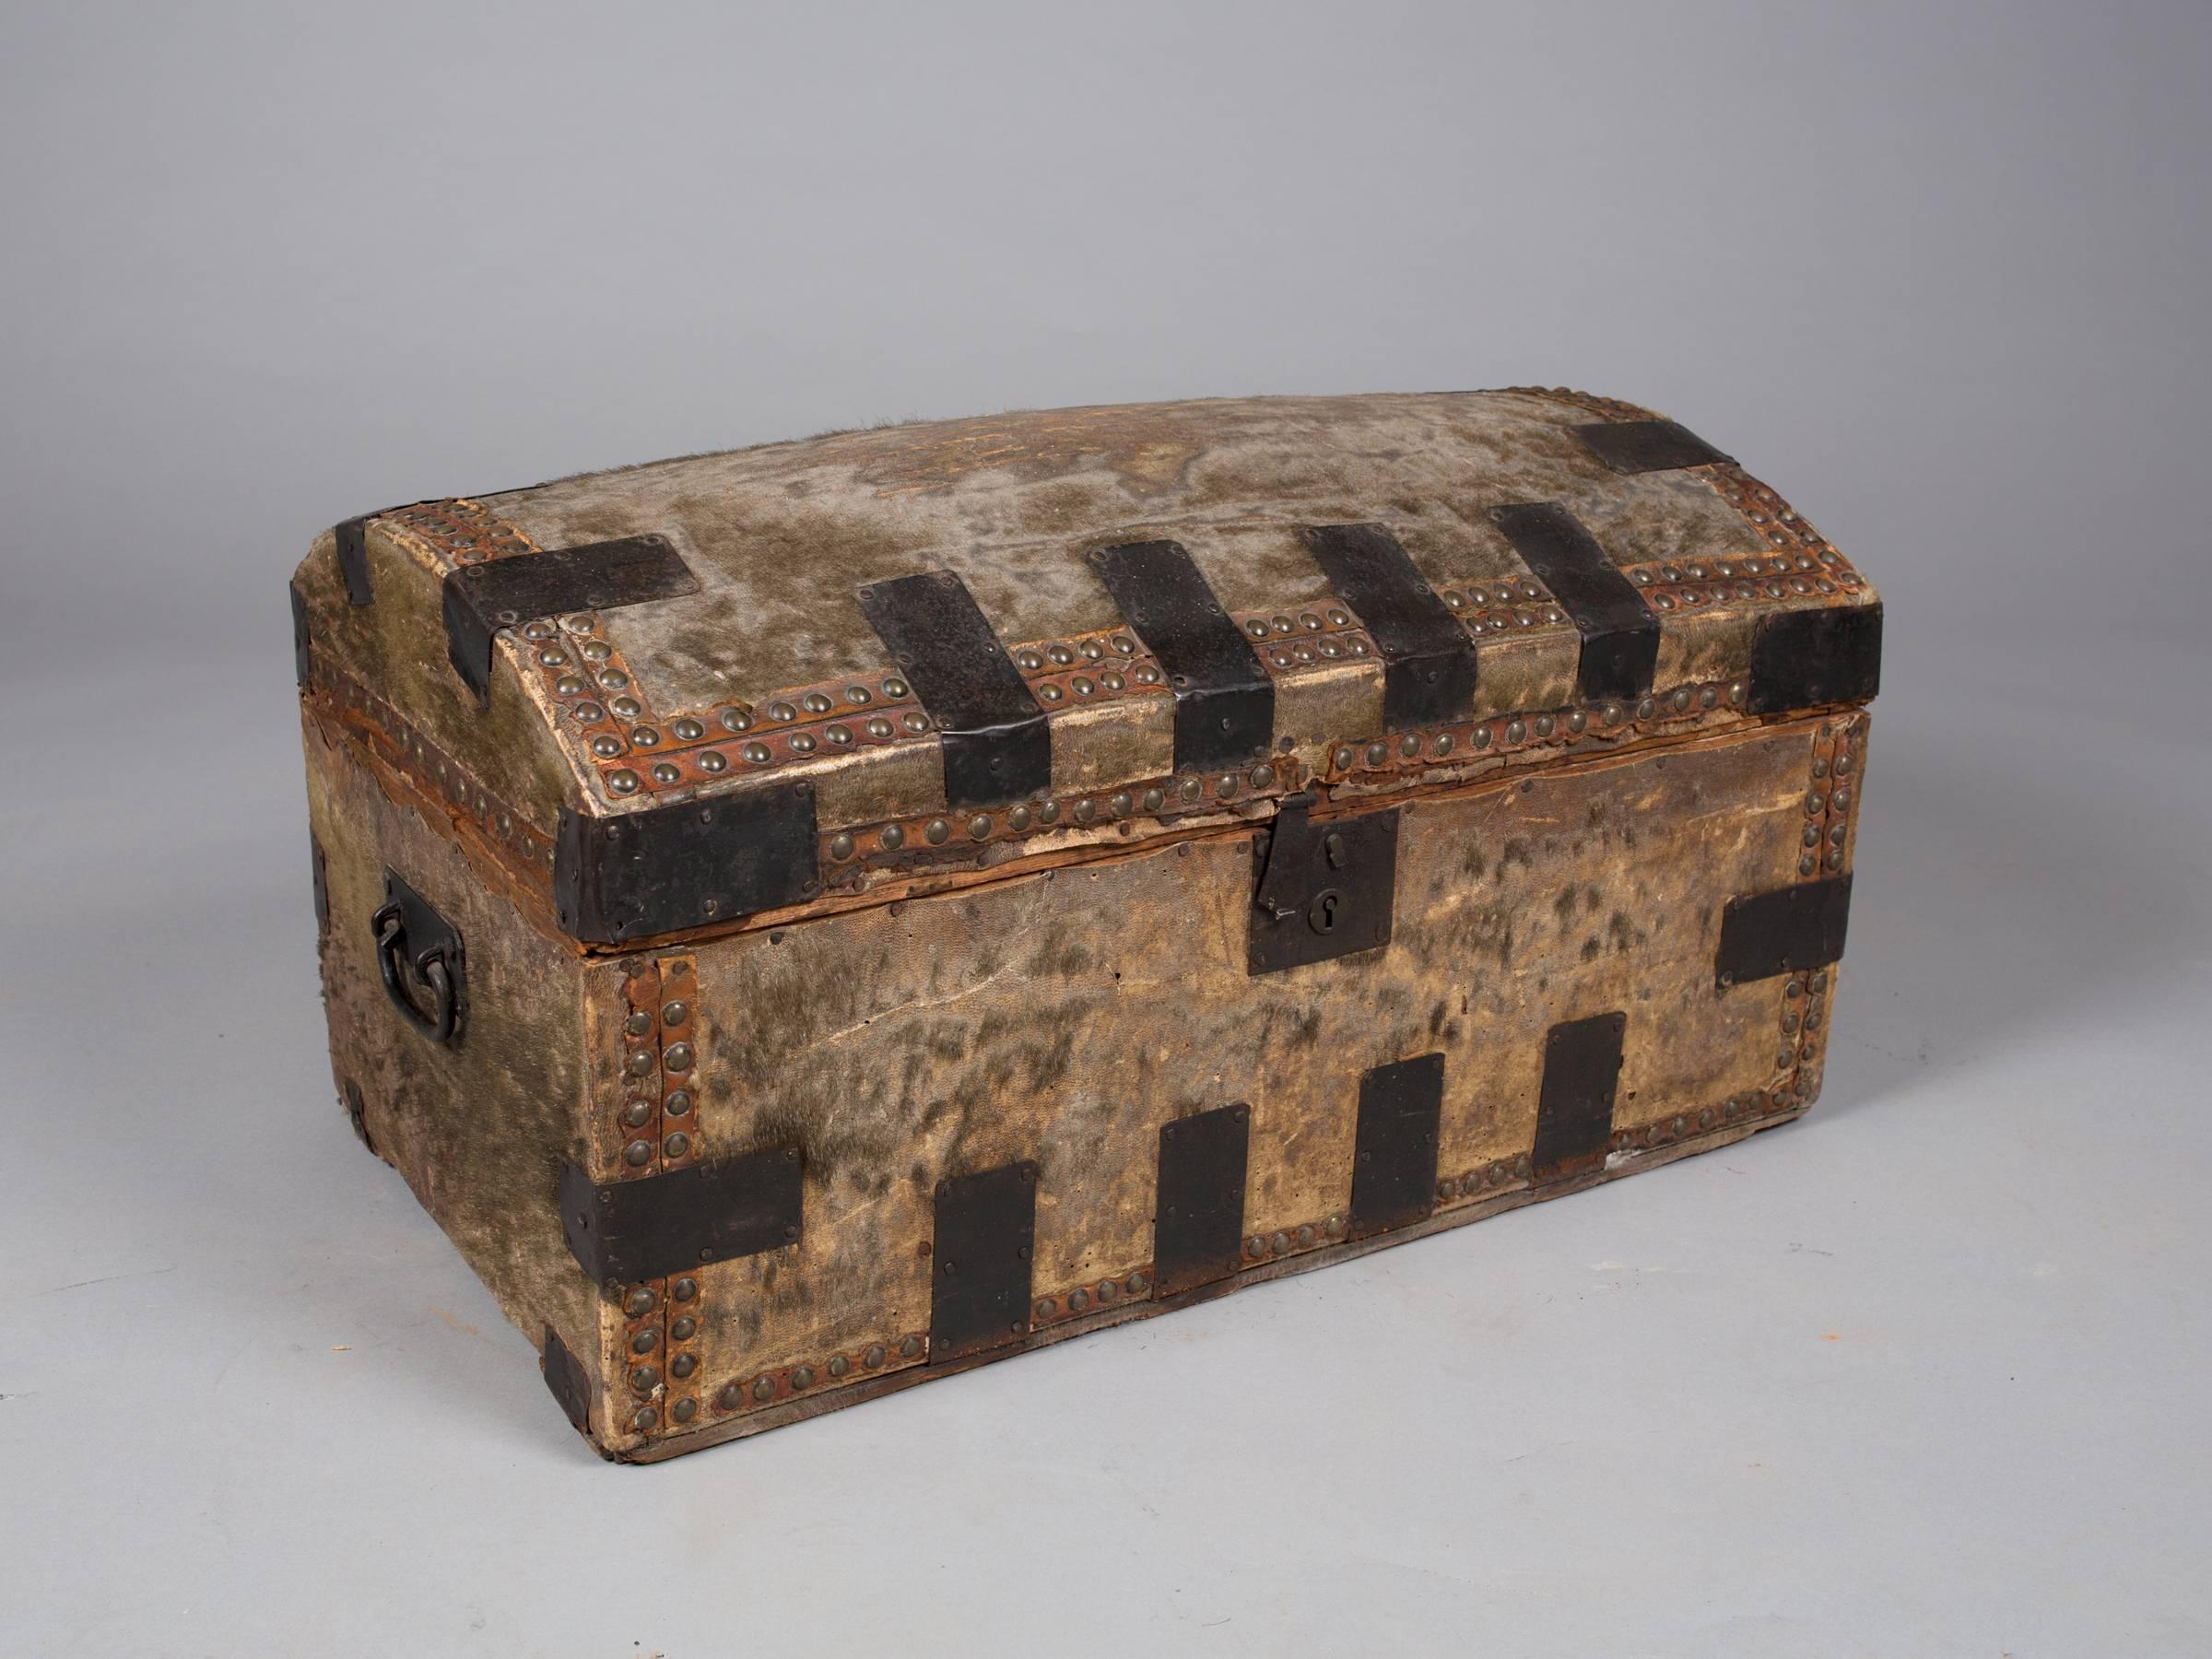 Handsome collection of 19th century leather and hair on hide trunks and boxes with original interior paper linings. Newspaper lining on smaller dark trunk dated March 20th, 1824. Beautiful age and patina. Please see condition details. 
Large trunk